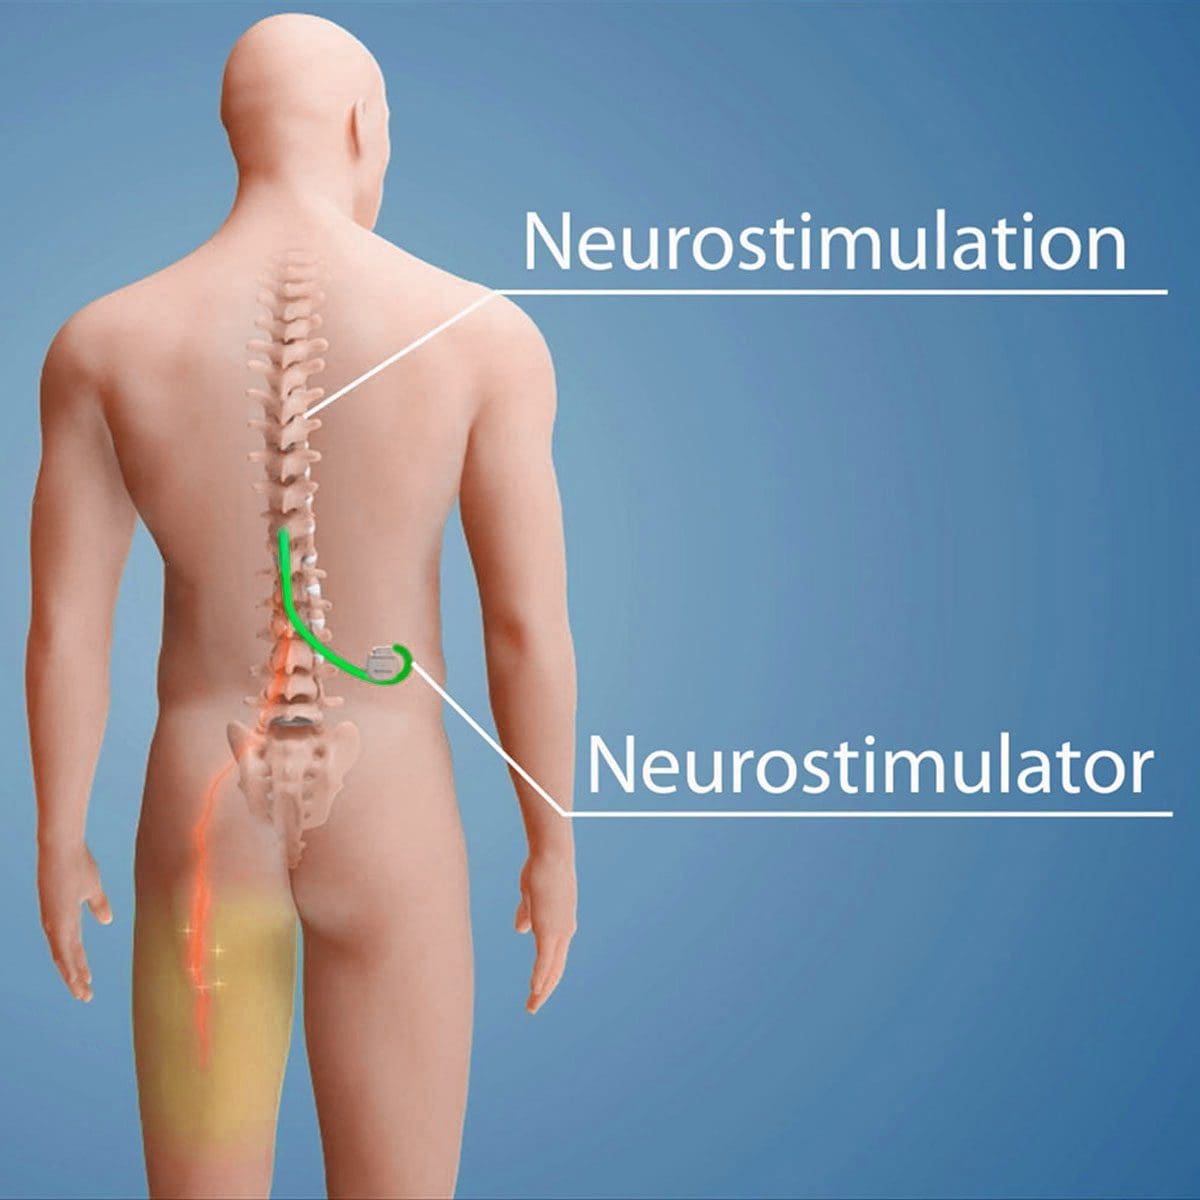 11860 Vista Del Sol, Ste. 128 Spinal Stimulation and Chronic Back Pain